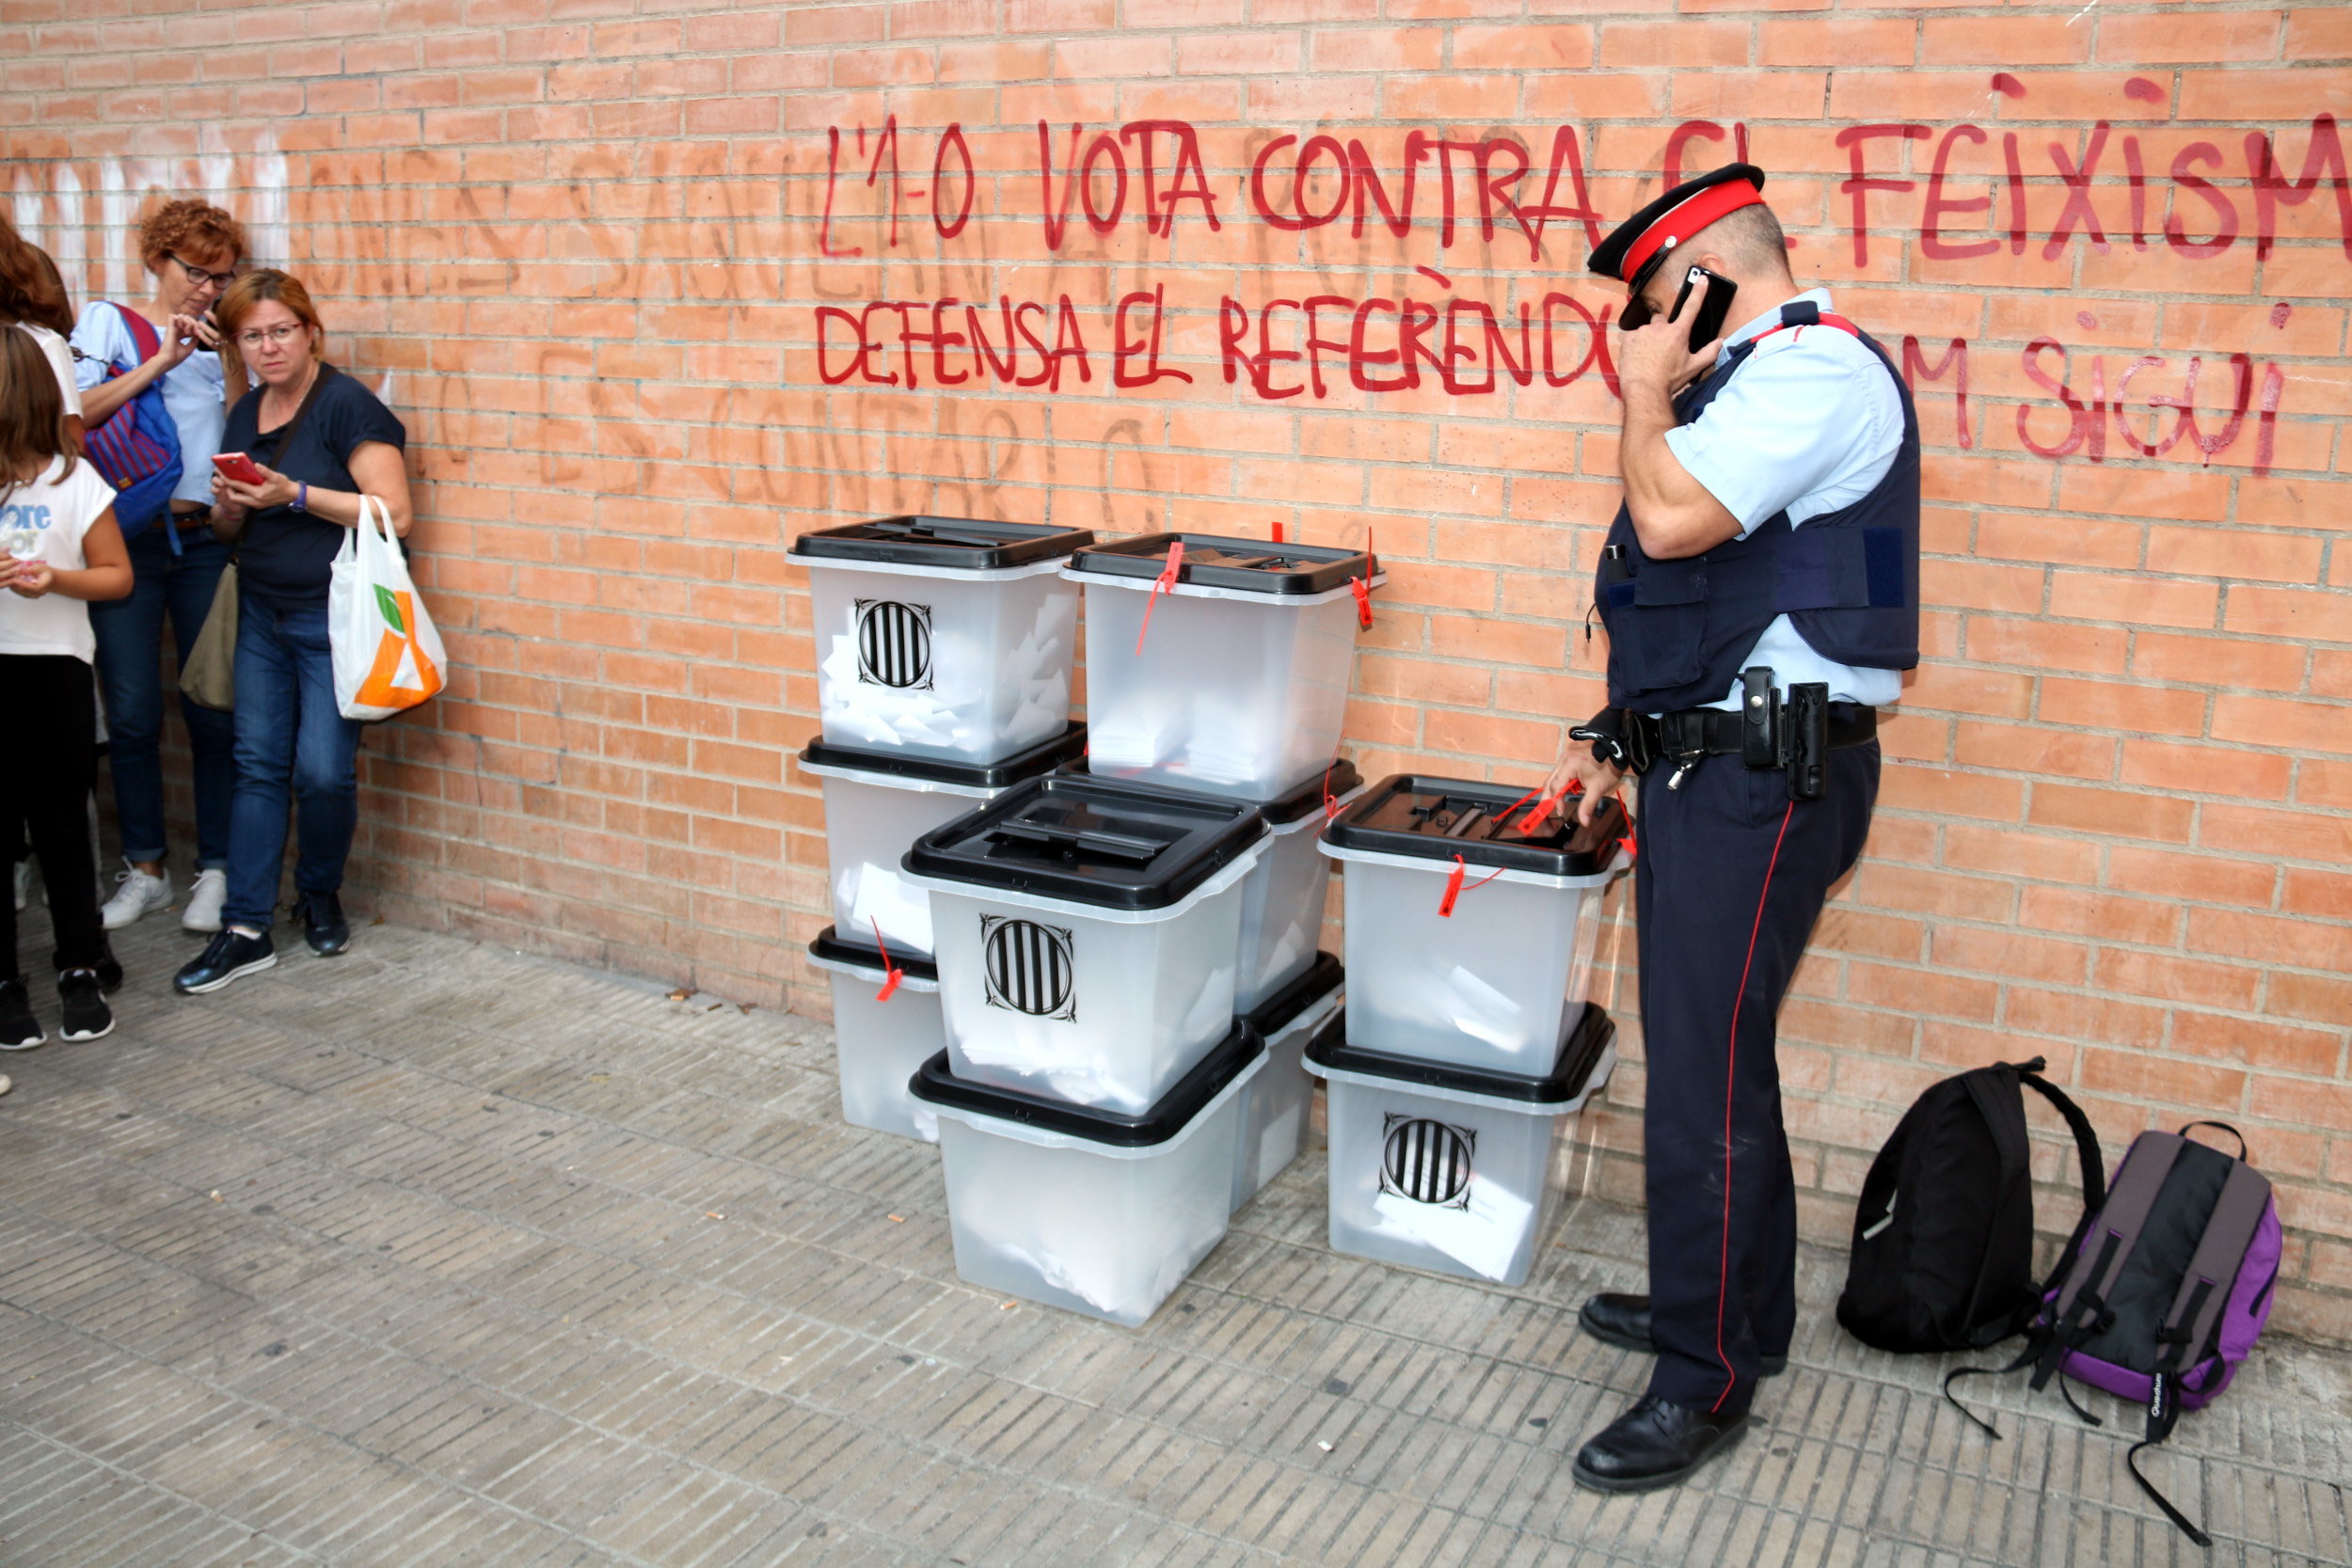 A Catalan police officer looking over some ballot boxes in Lleida (by Salvador Miret)